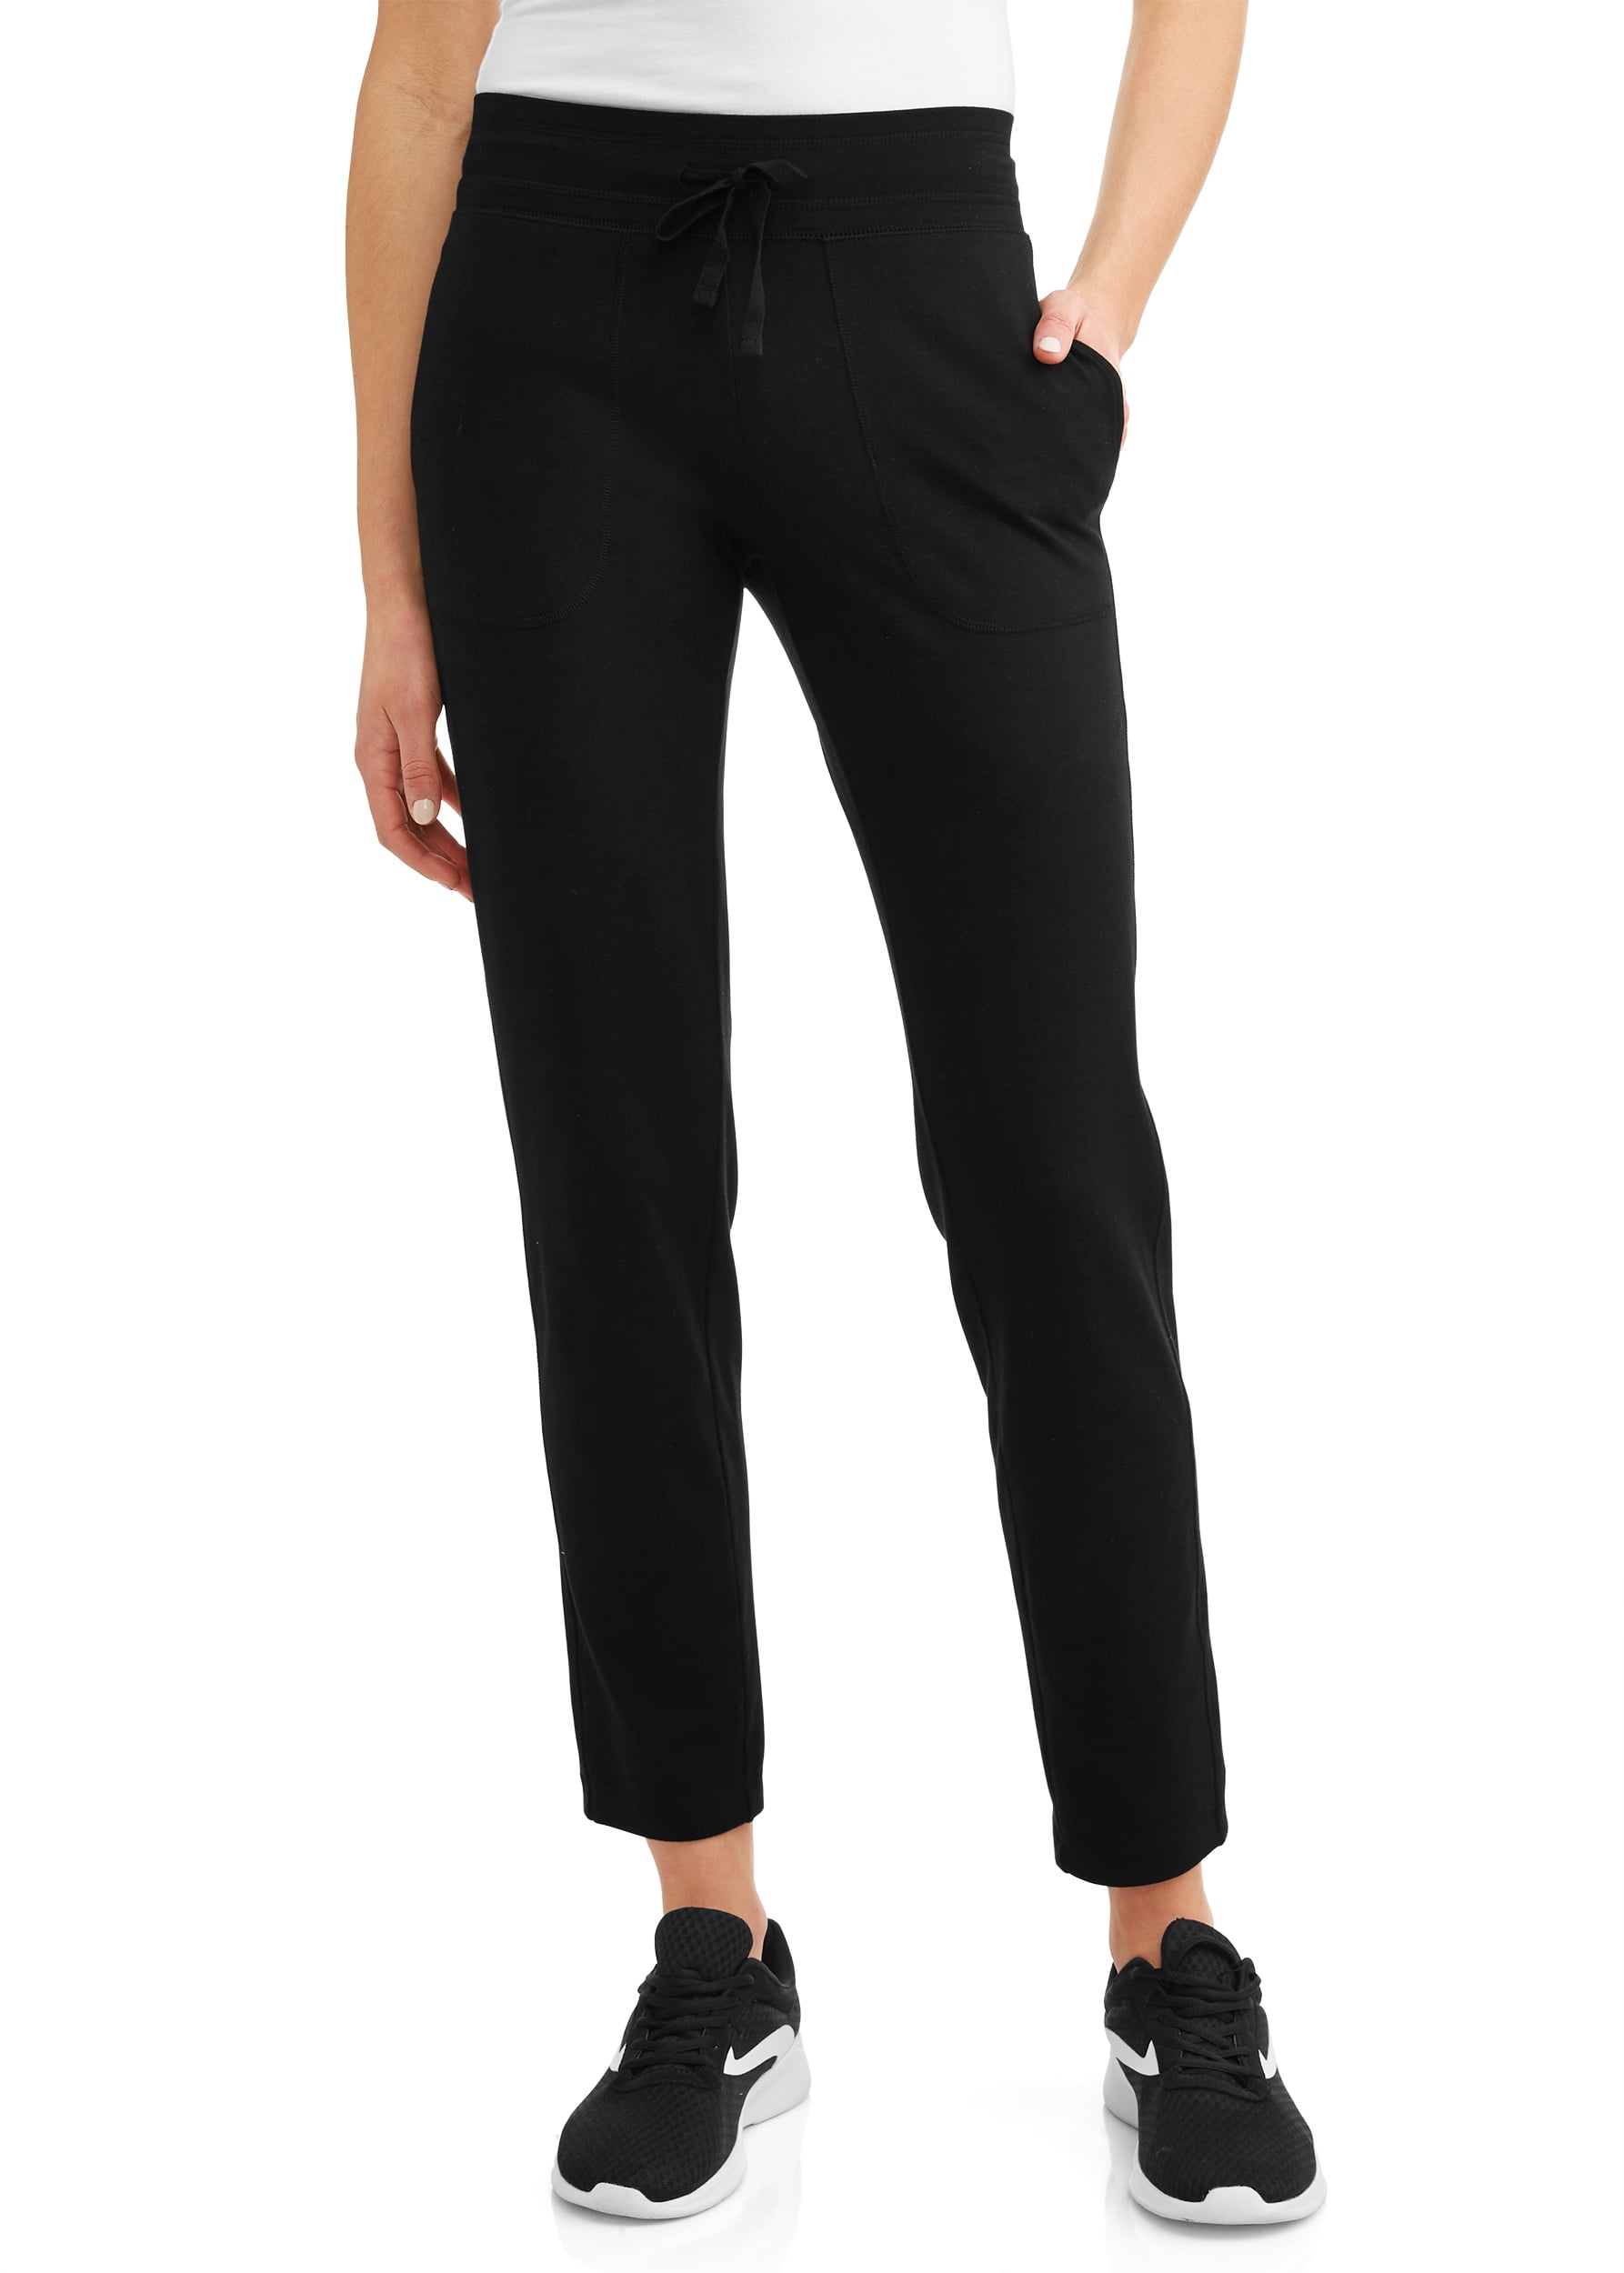 Athletic Works Women's Athleisure Core Knit Pant in Regular and Petite ...